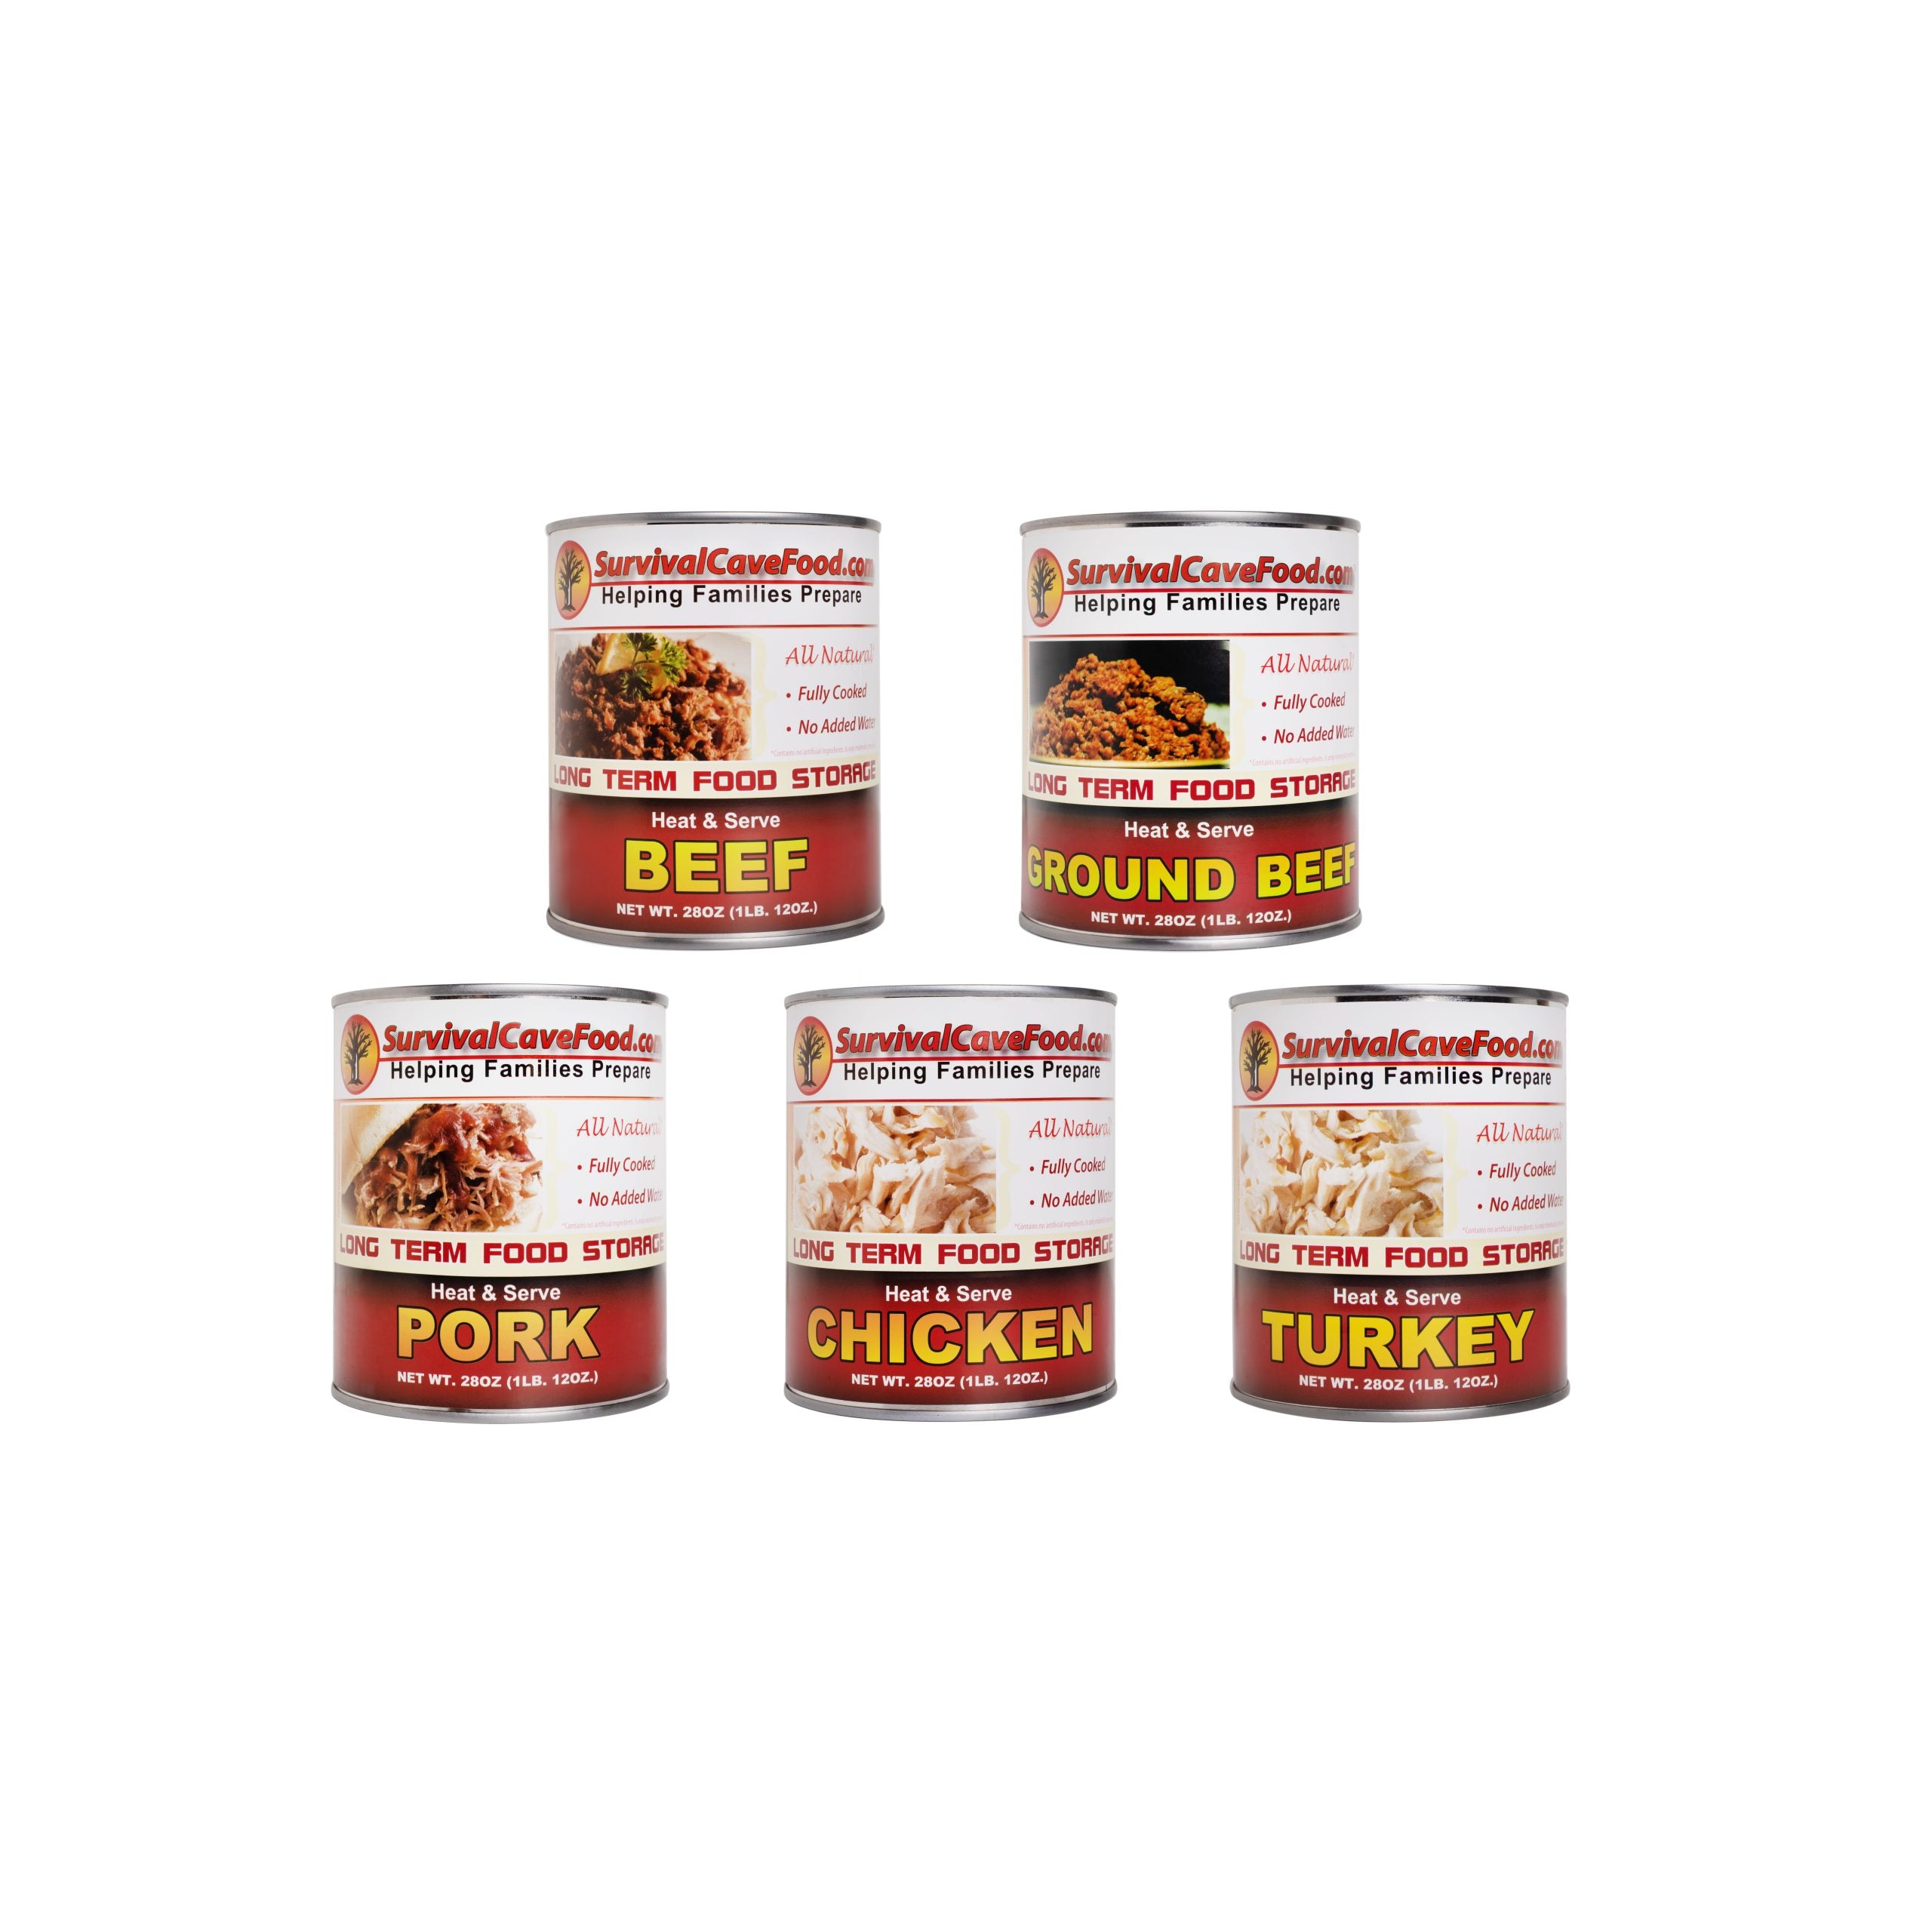 Survival Cave Mixed 12 – 28 oz Cans – 3 Chicken, 3 Turkey, 3 Pork, 3 Ground Beef – Ready to Eat Canned Meat